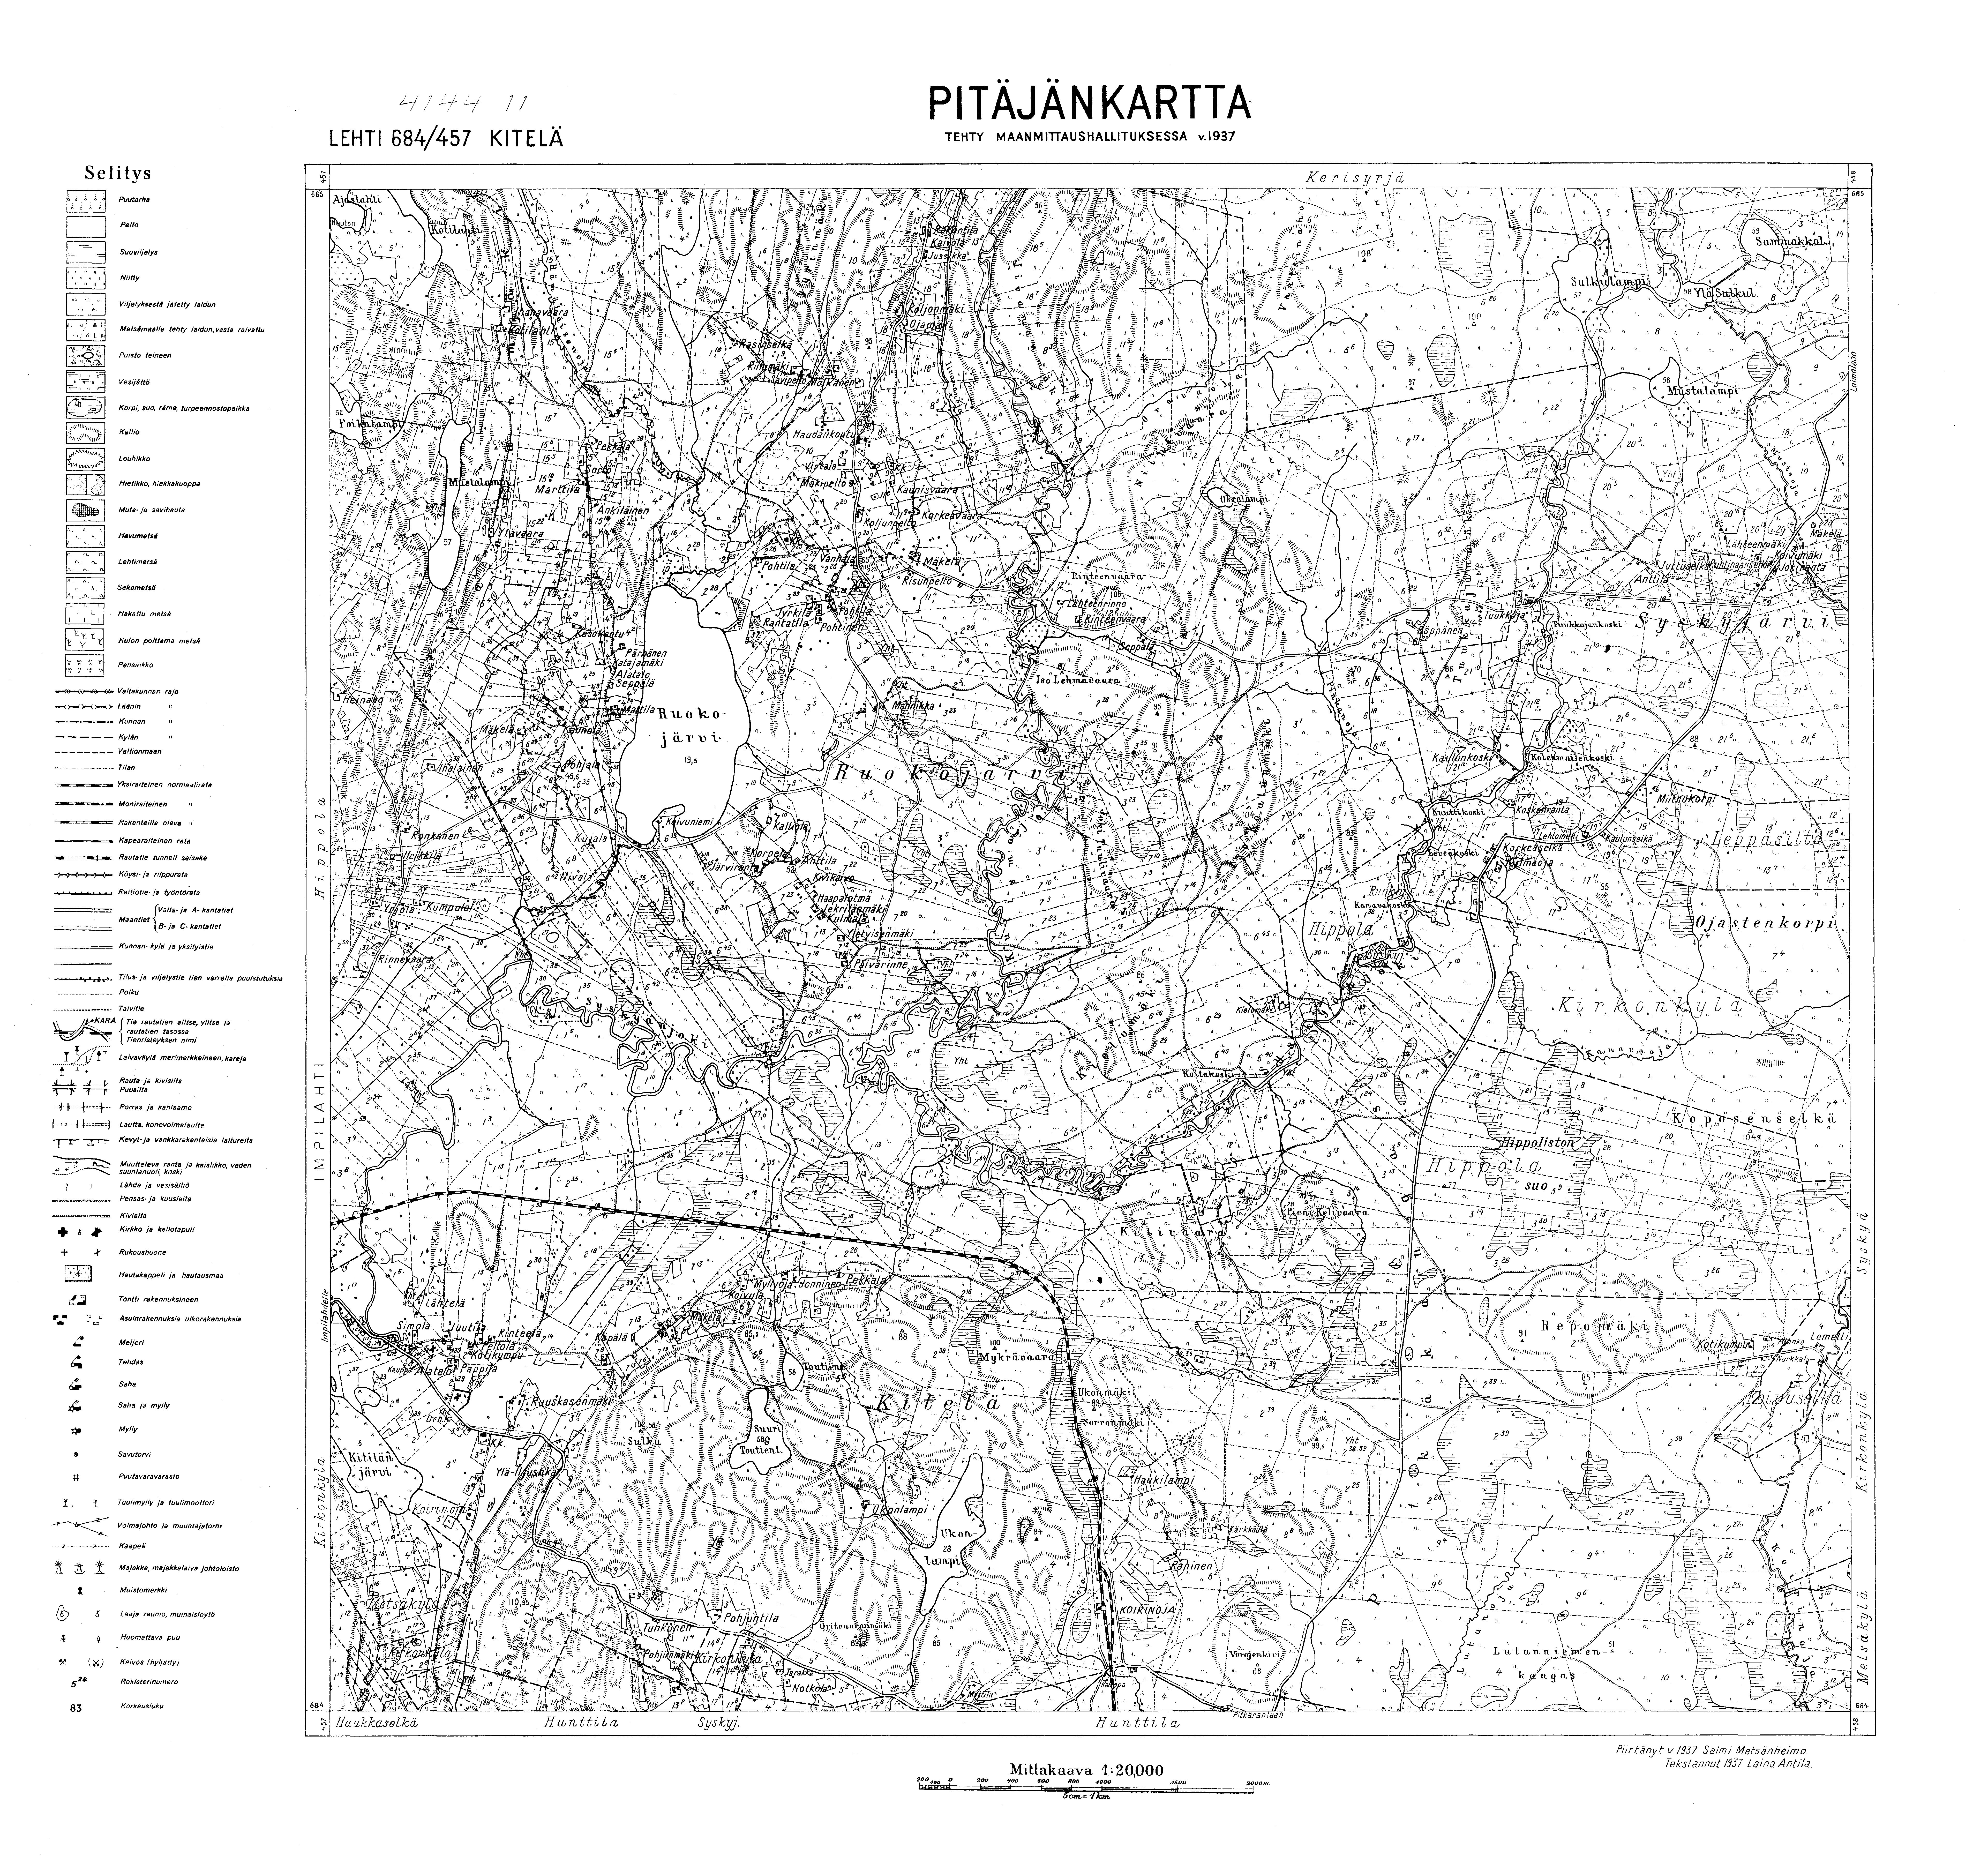 Kitelja. Kitelä. Pitäjänkartta 414411. Parish map from 1937. Use the zooming tool to explore in higher level of detail. Obtain as a quality print or high resolution image